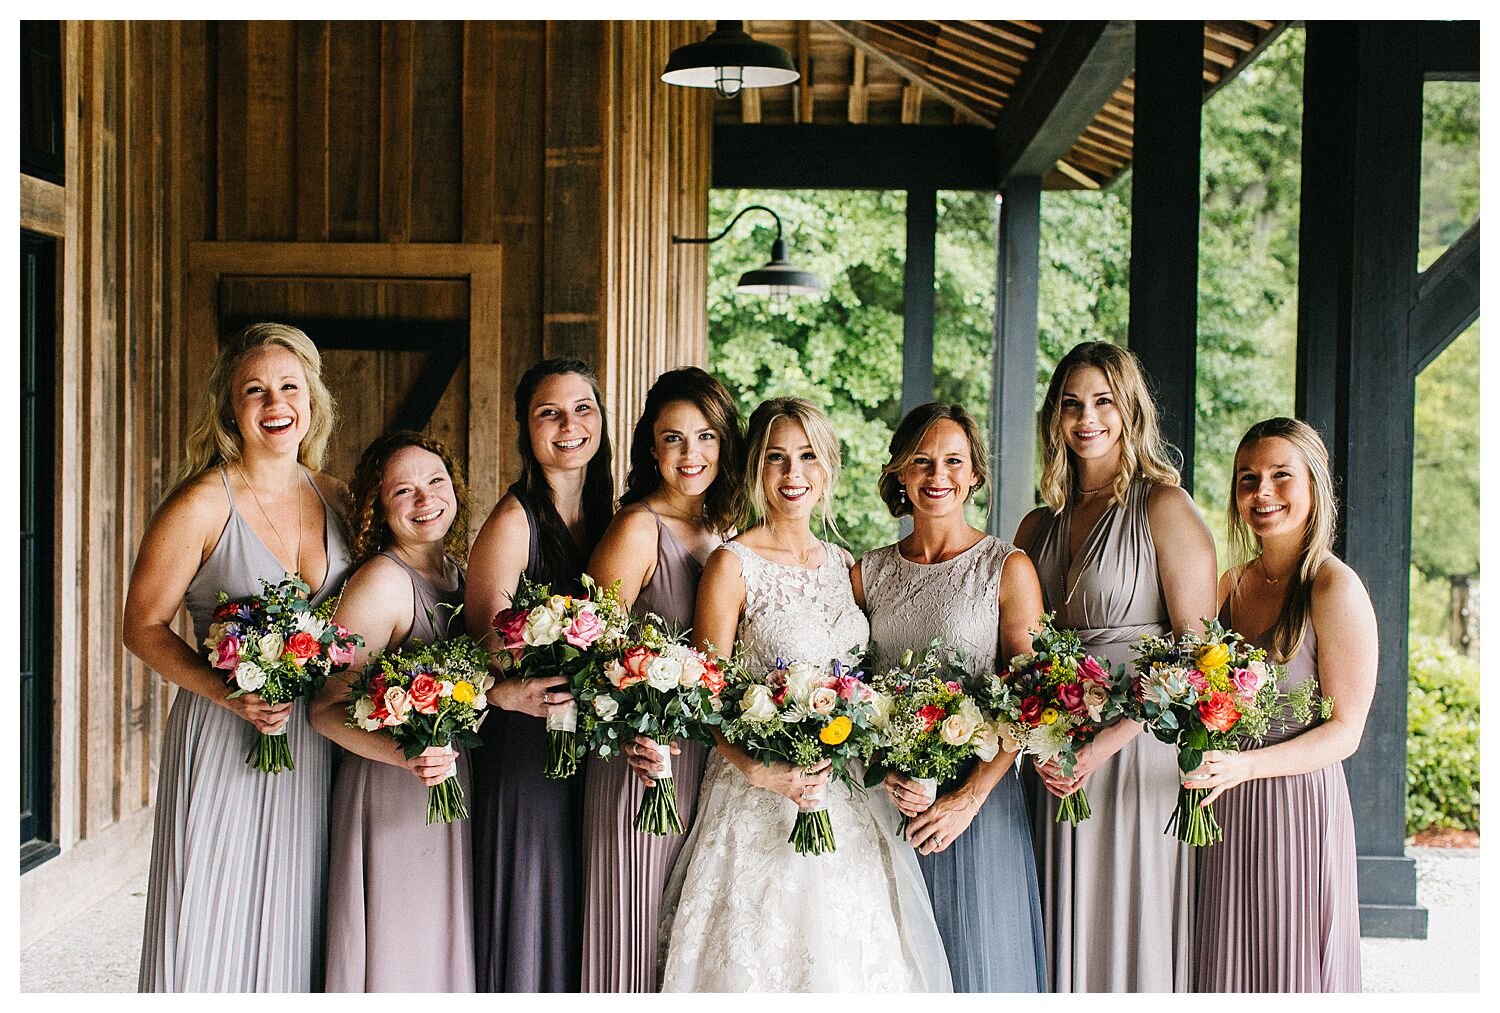 Bridesmaids in mismatched neutral dresses